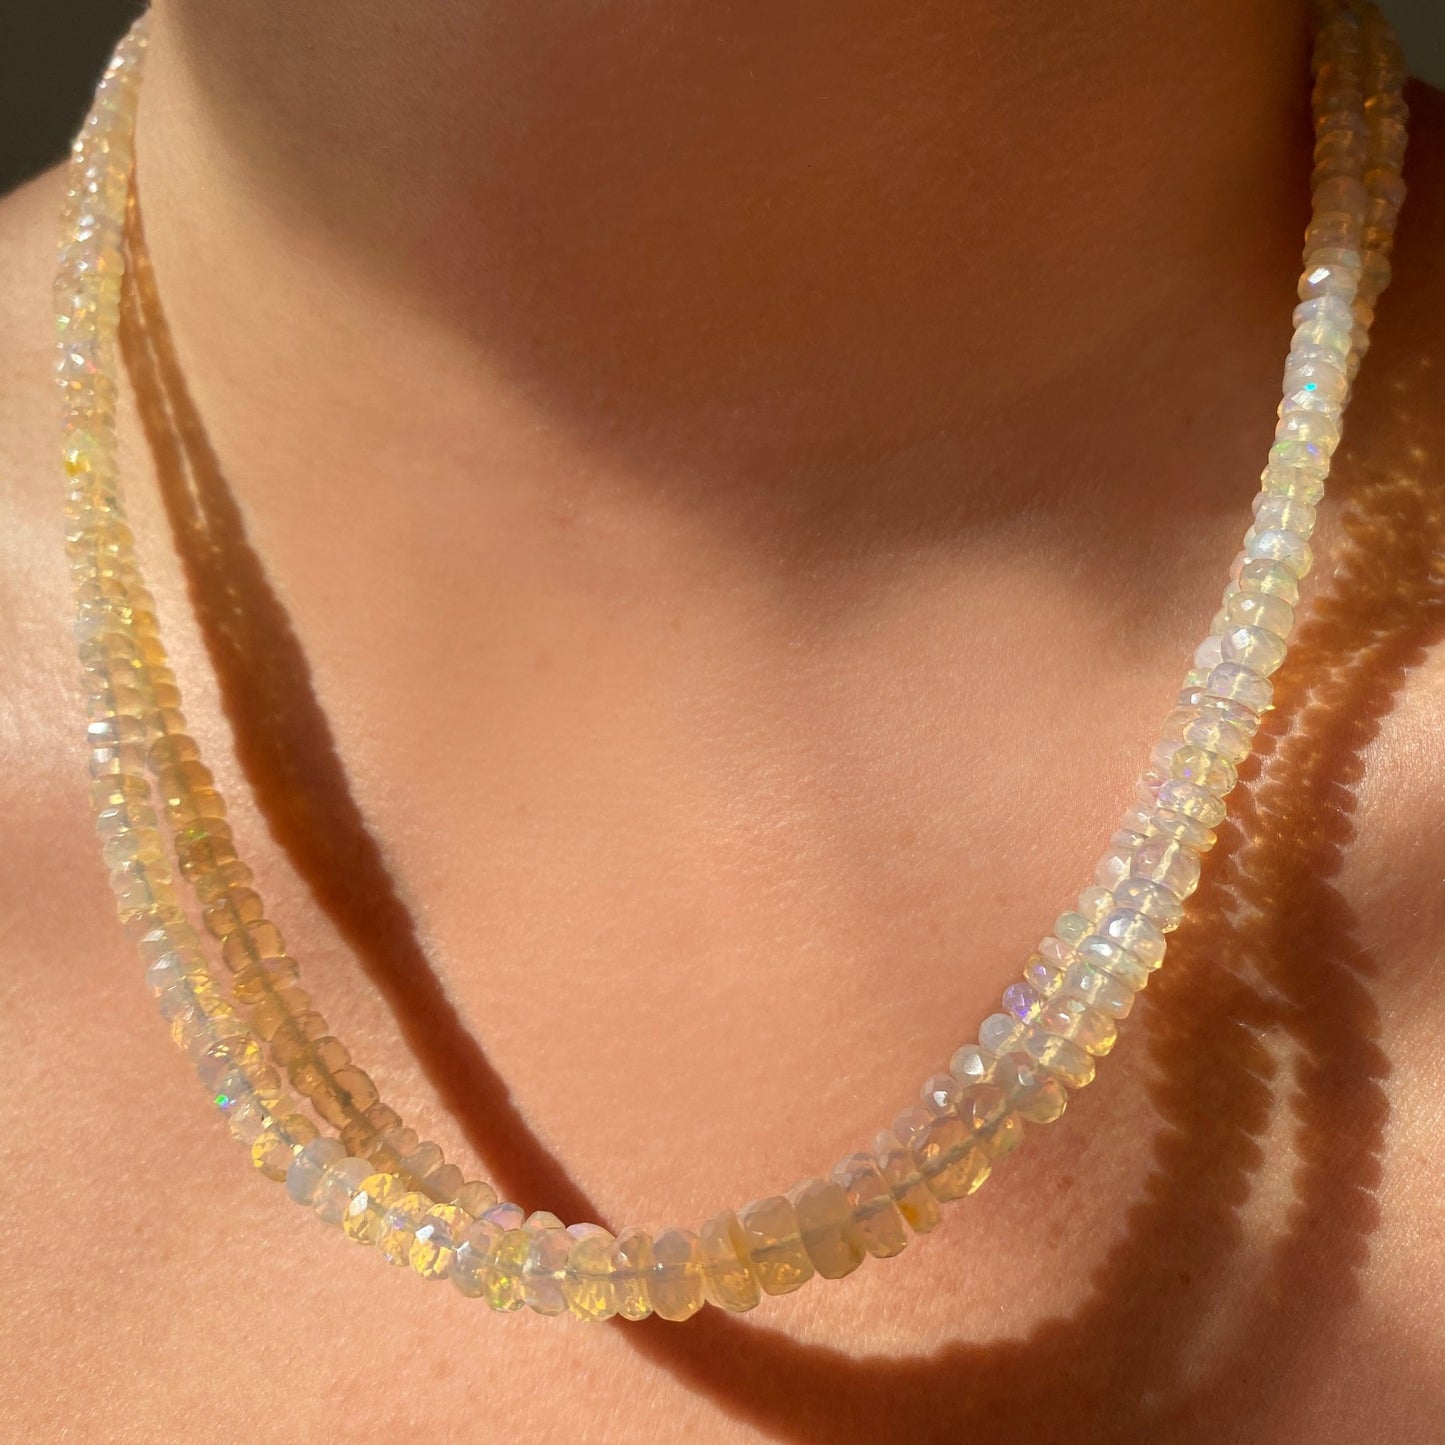 Shimmering beaded necklace made of faceted opals in shades of clear and nude opals on a gold linking ovals clasp.